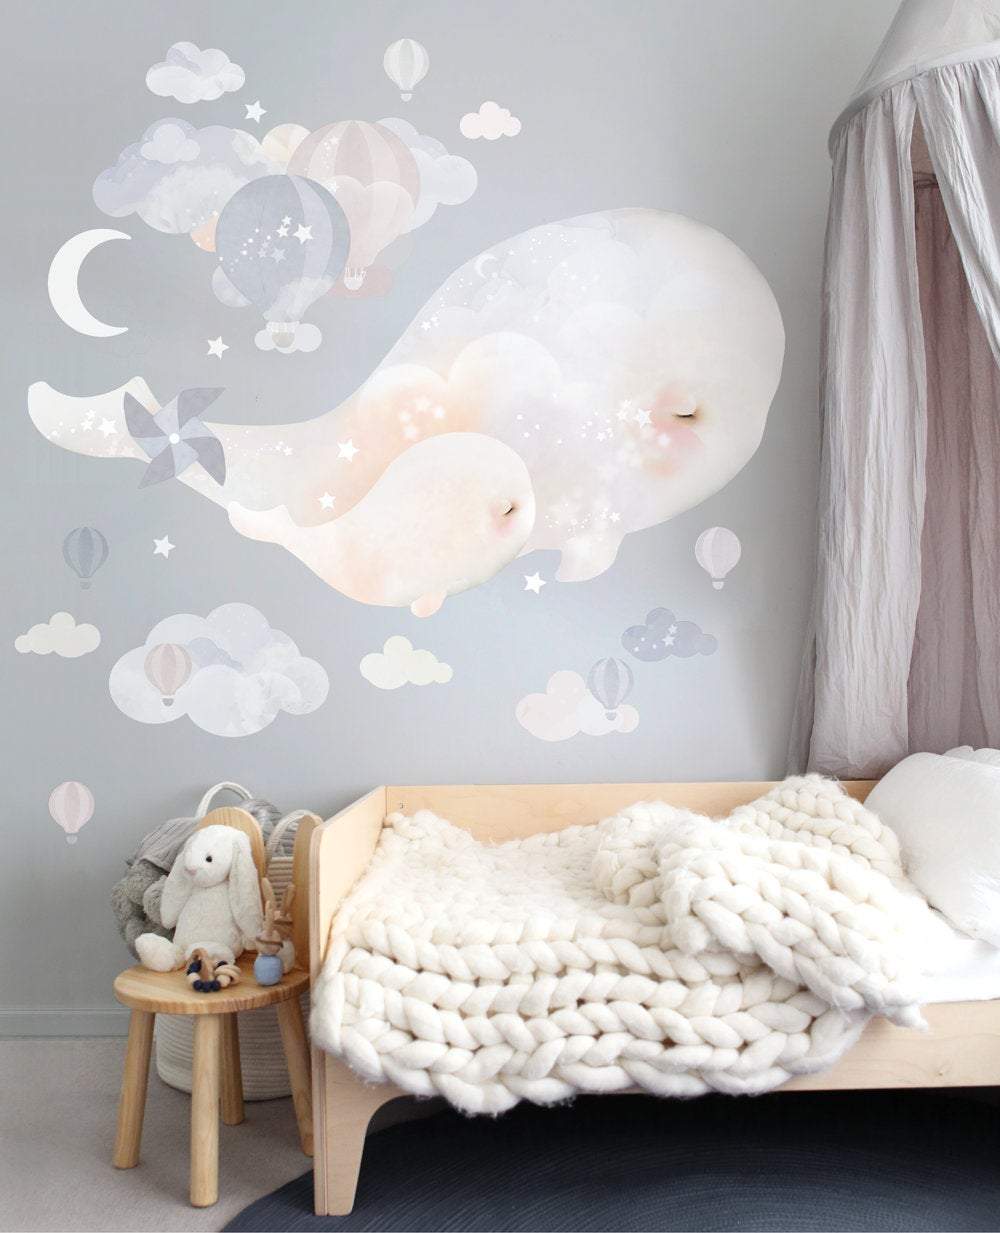 Beluga Whales Wall Stickers